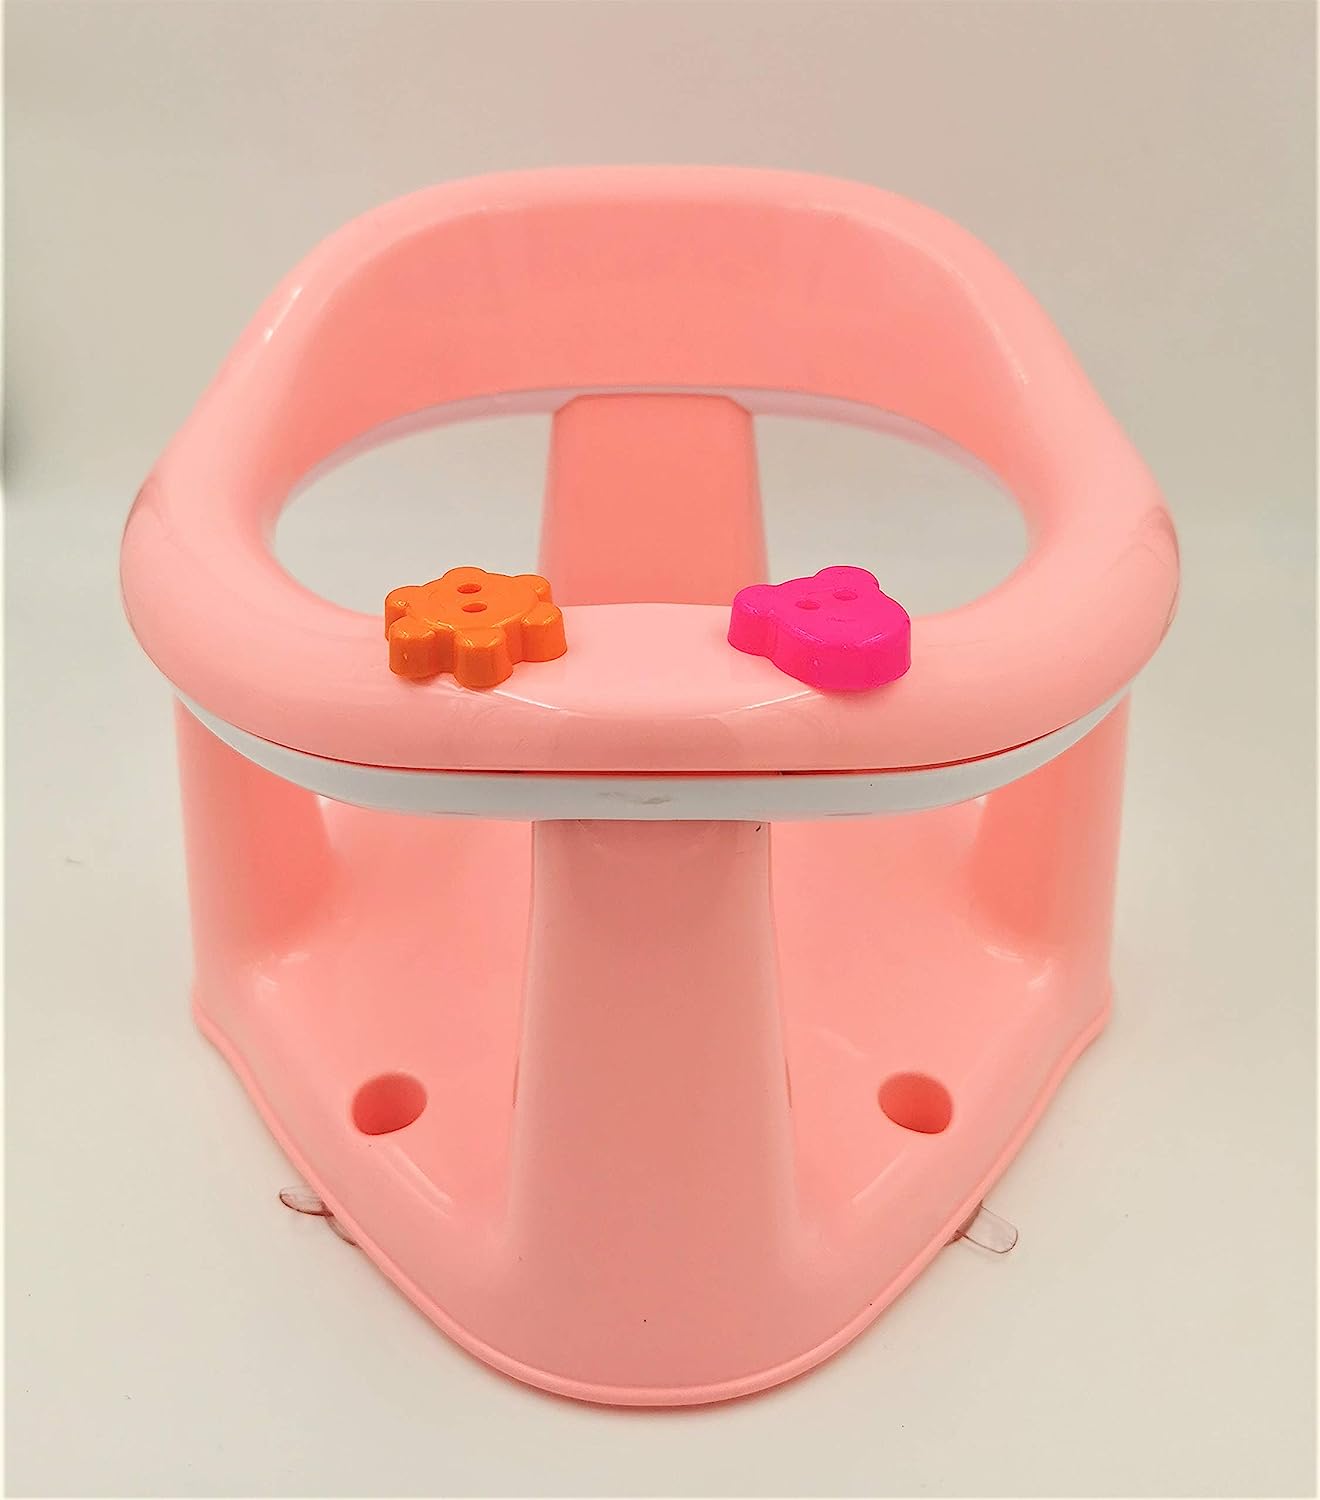 3 in 1 Baby Toddler Child Bath Support Seat Safety Bathing Safe Dinning Play BPA Free Baby Pink